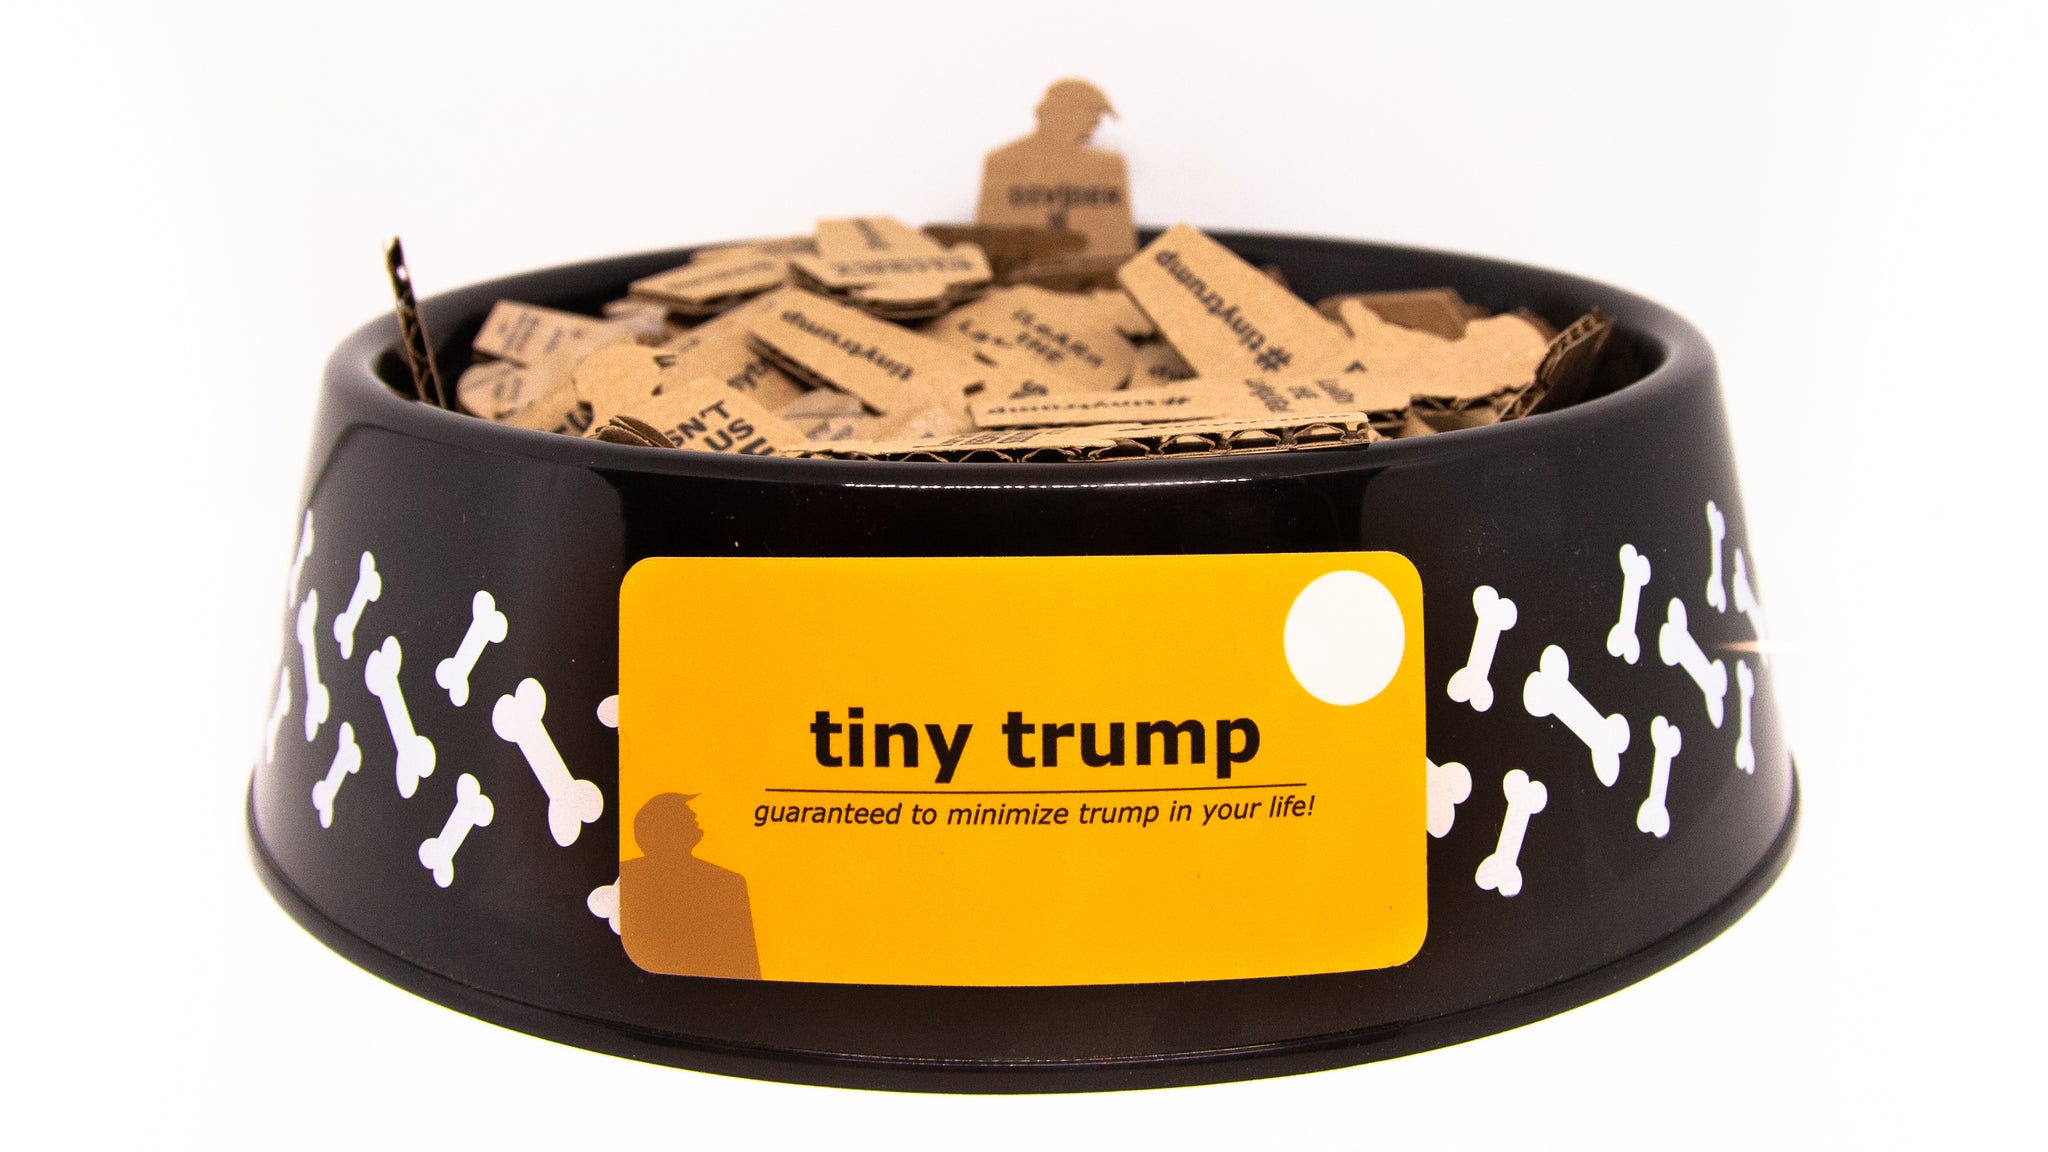 Variant showing a set of either 240 or 480 tiny trumps in a dog bowl